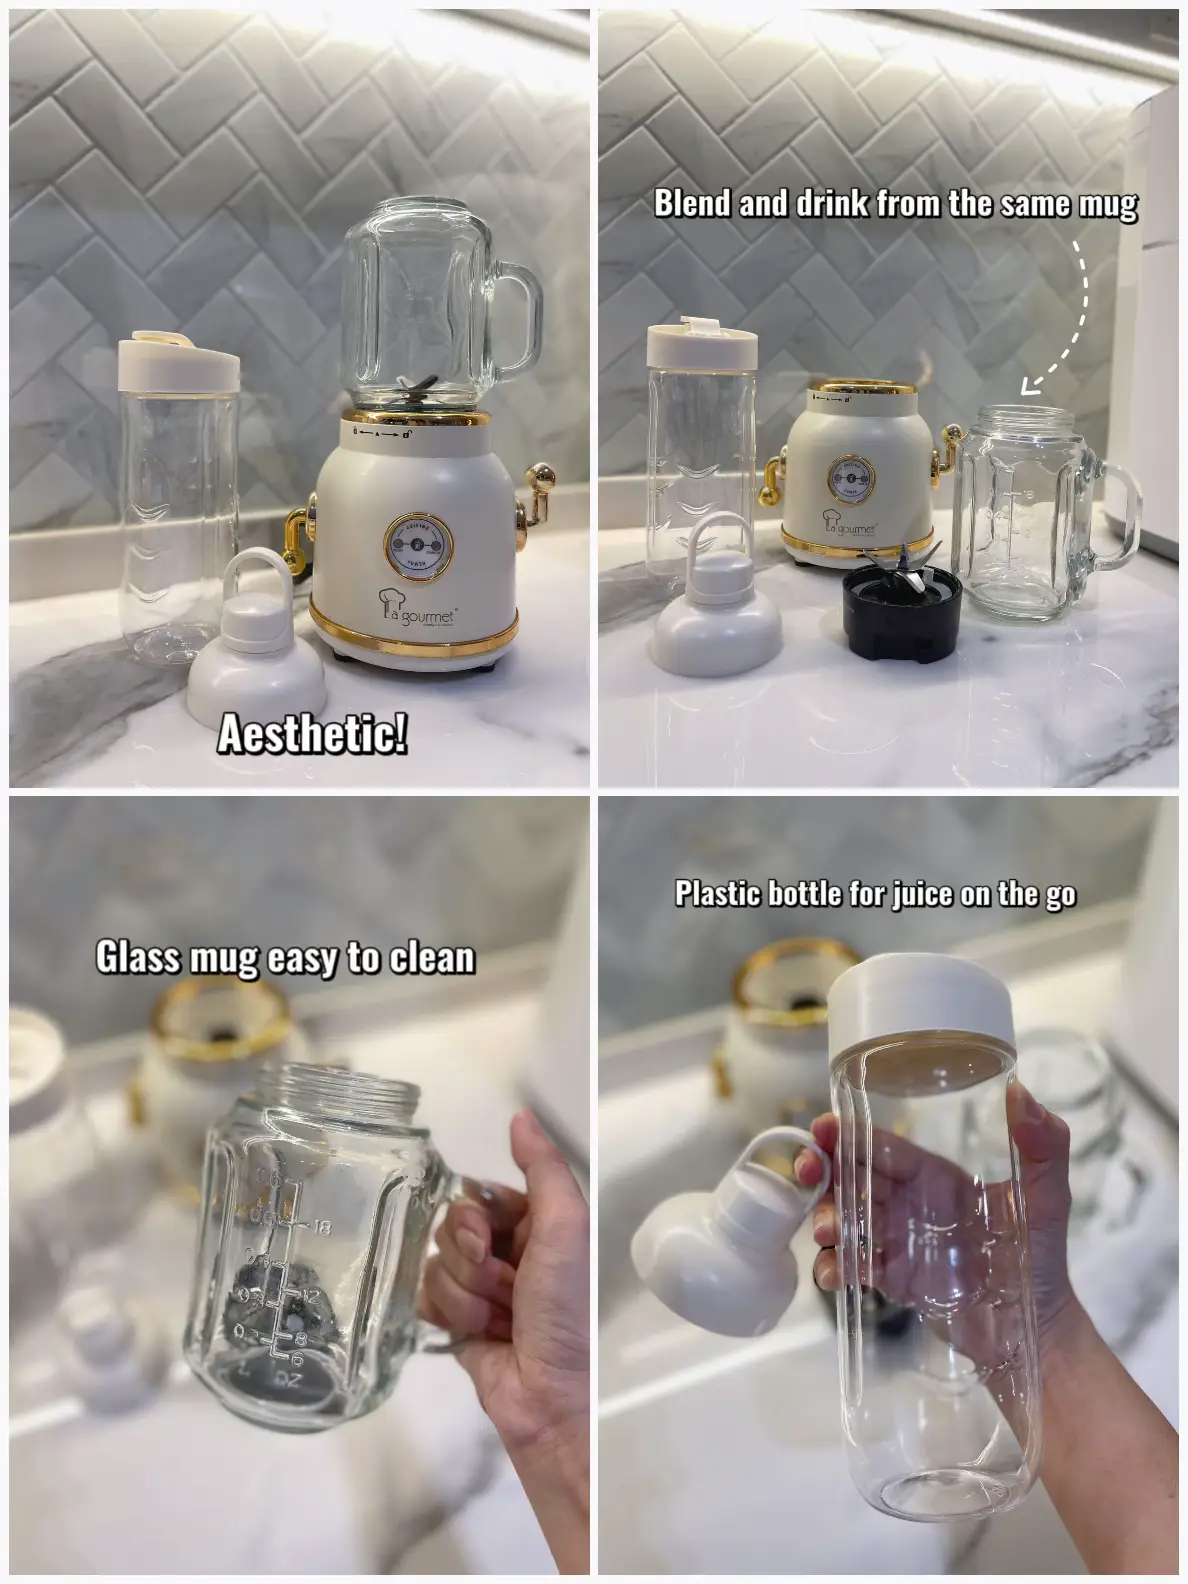 Be healthier with this cute blender!🥰, Gallery posted by Mustardseedhome